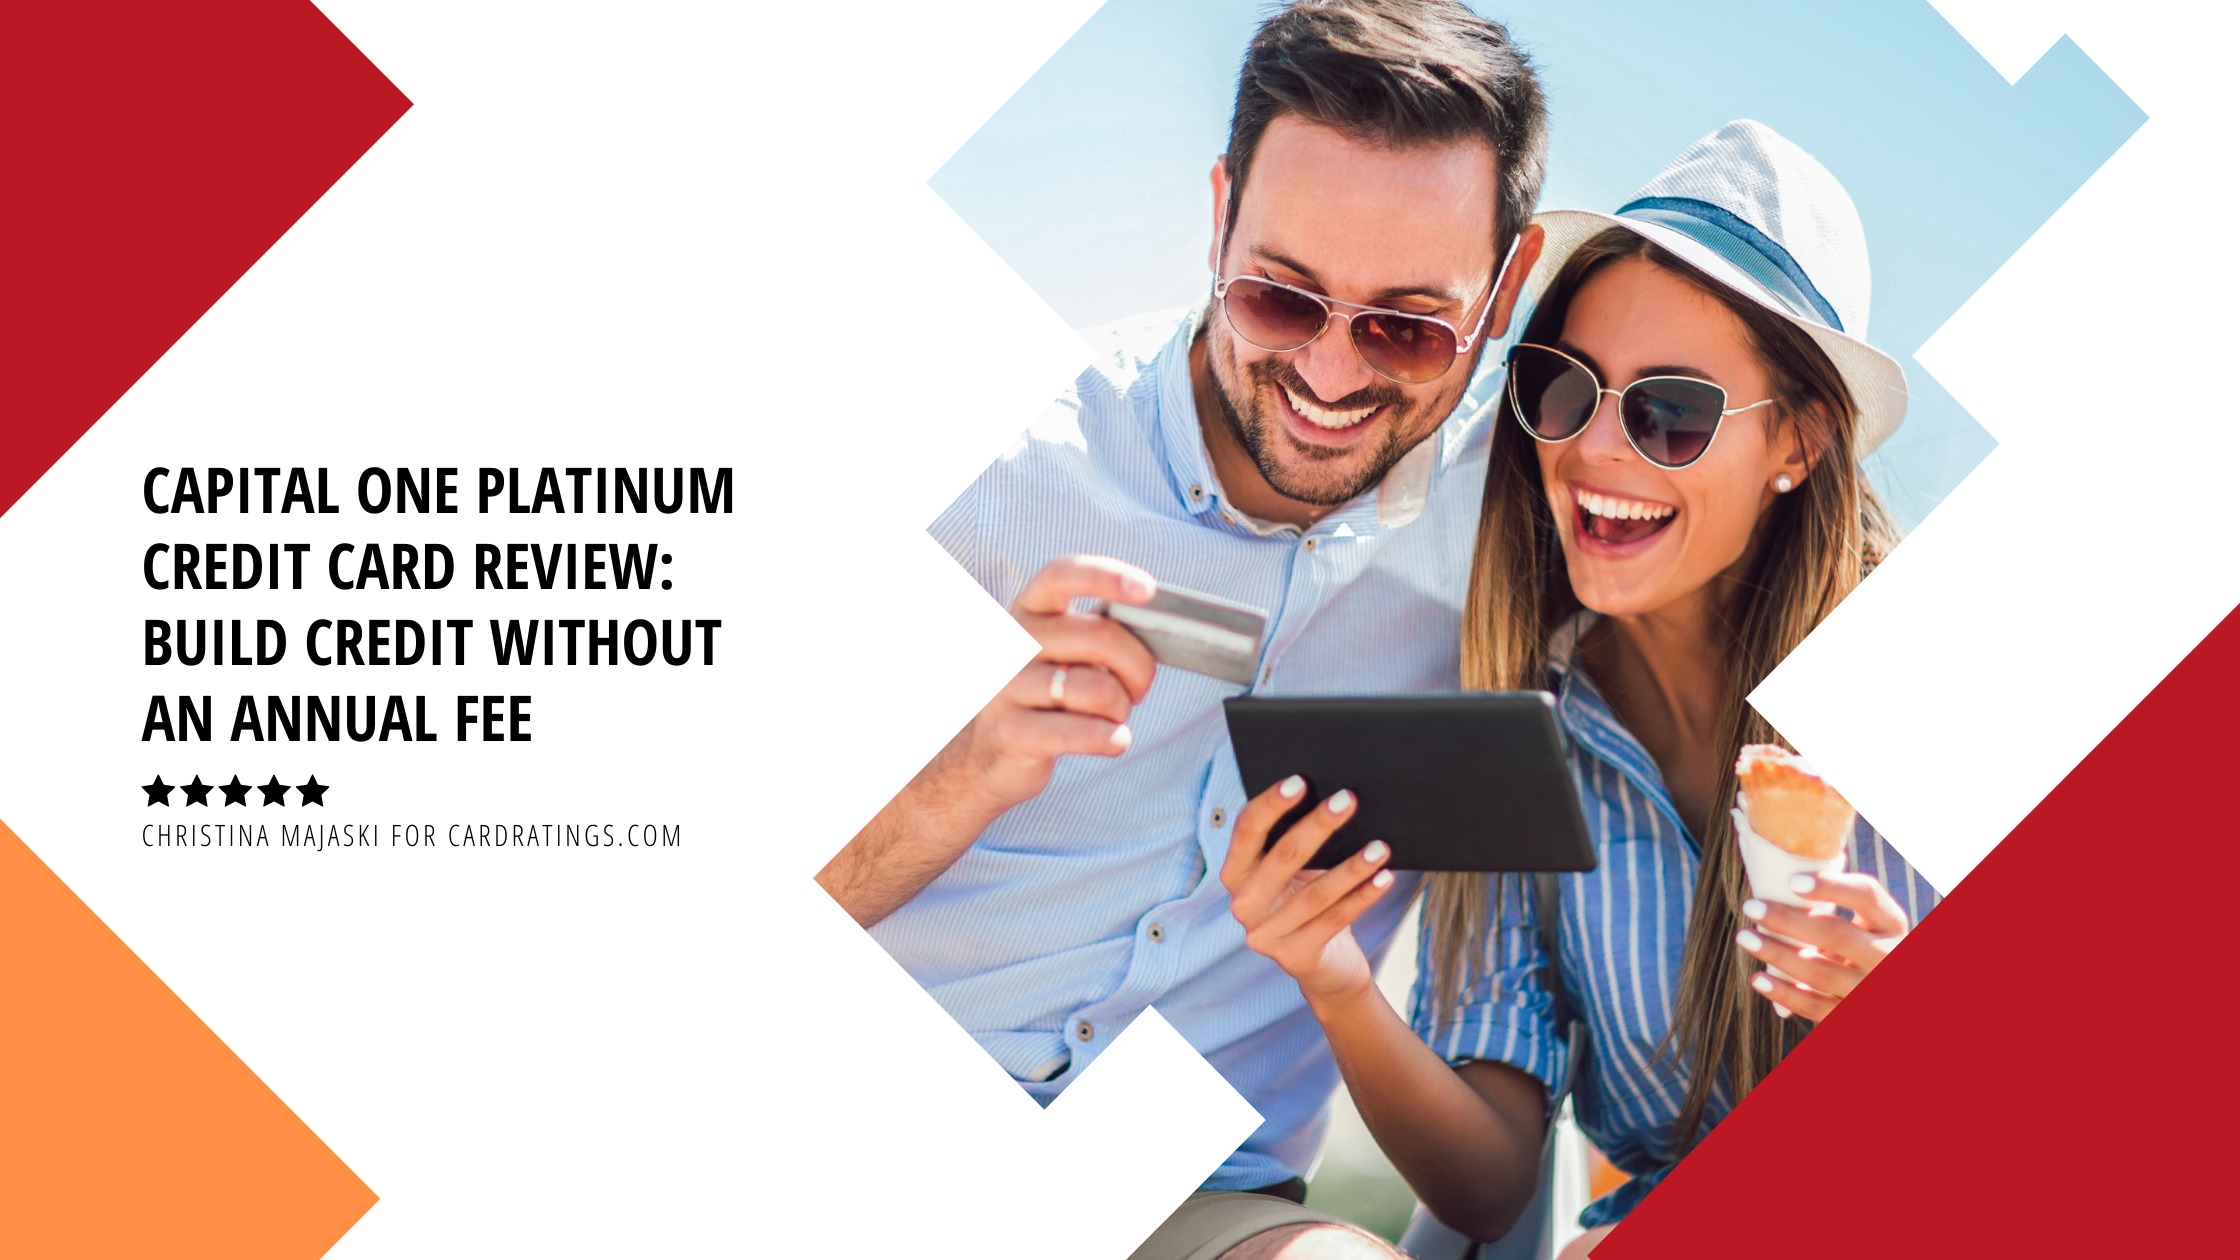 Capital One Platinum Credit Card Review: Build credit without an annual fee